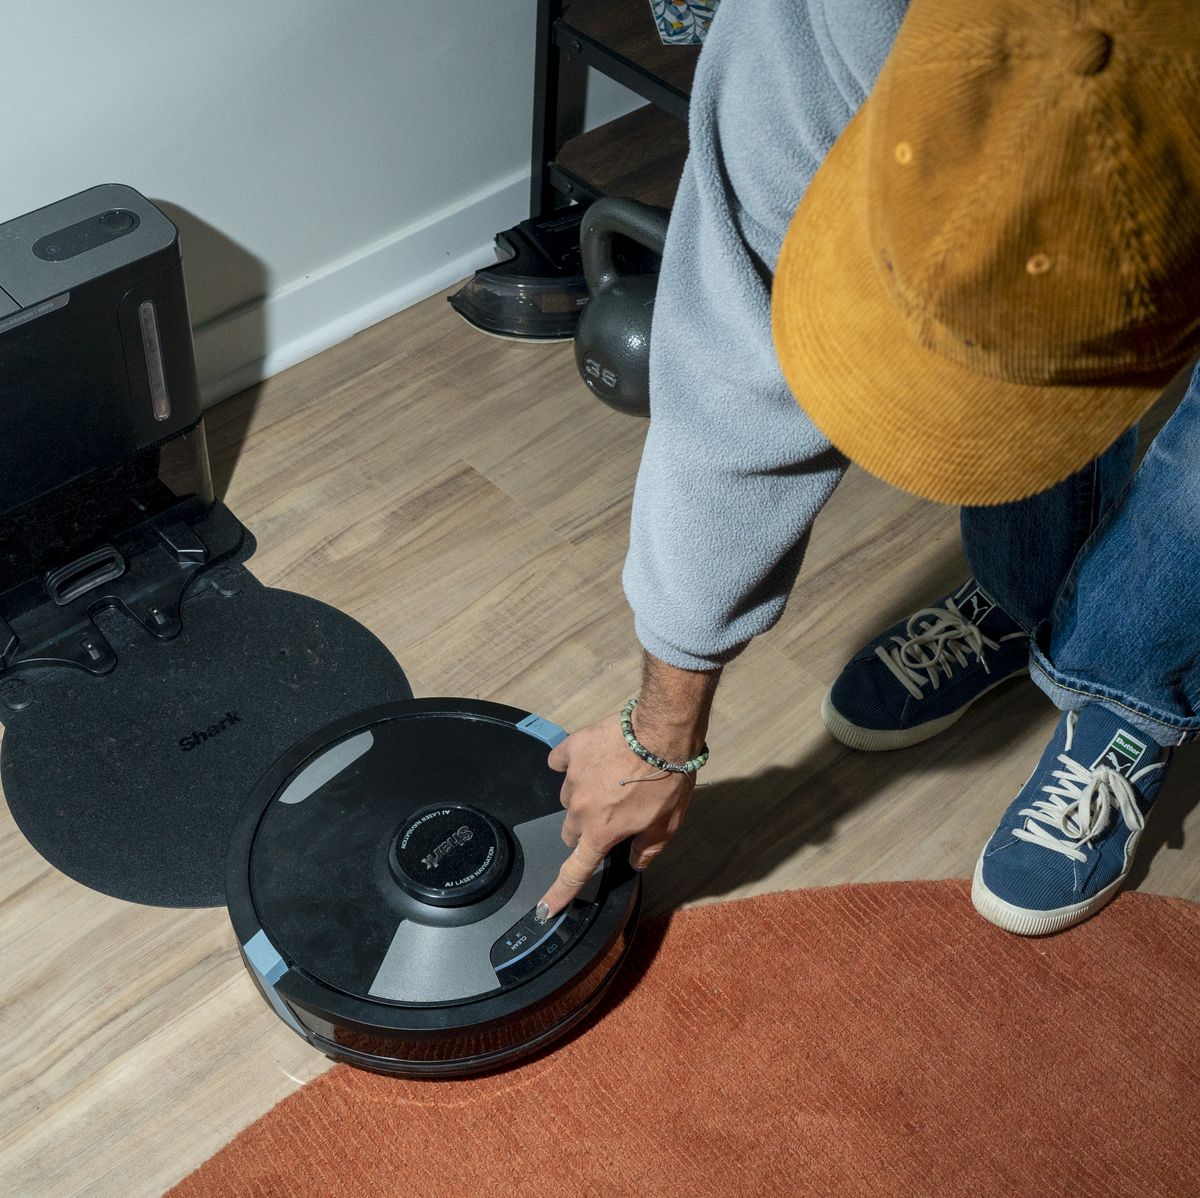 New Roomba combo bots have swappable dust and water tanks